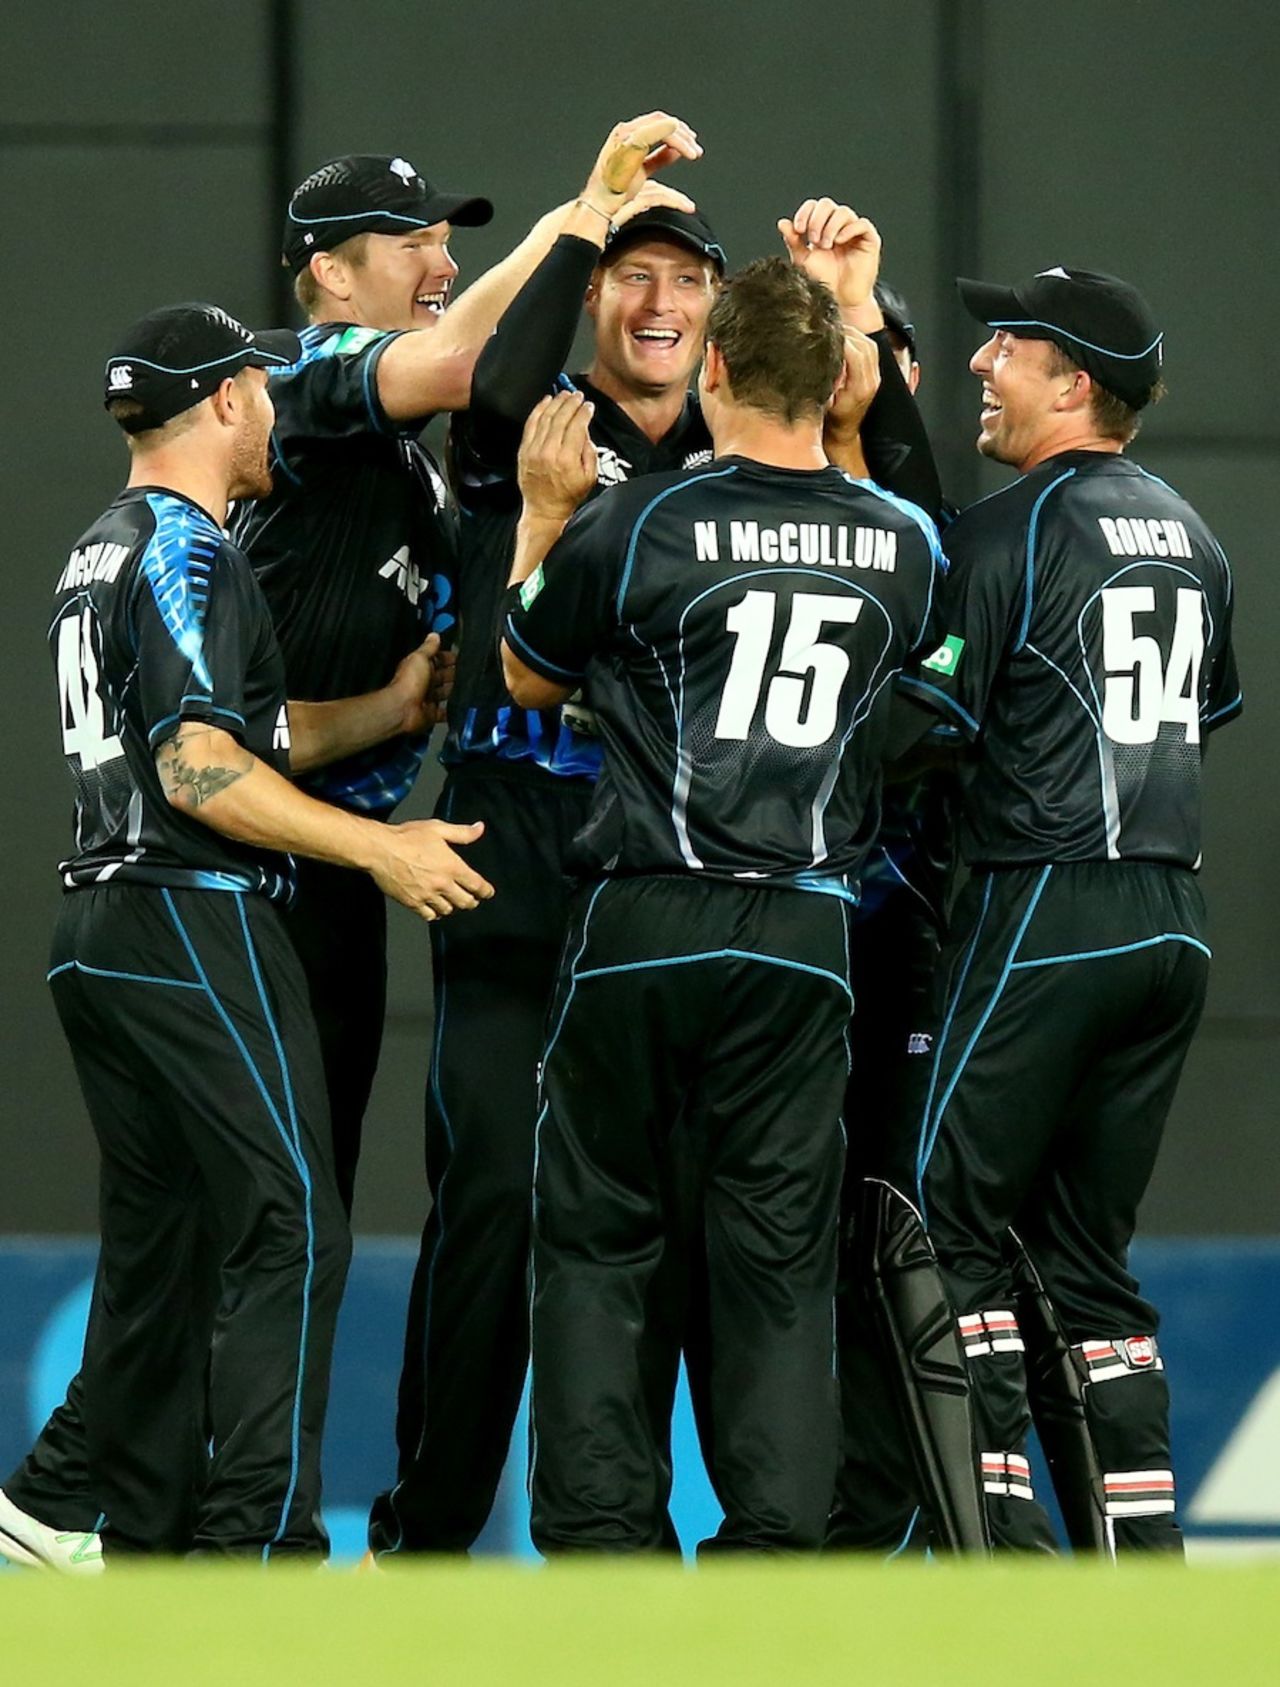 Martin Guptill is mobbed after taking a catch at the boundary, New Zealand v West Indies, 1st T20, Auckland, January 11, 2014